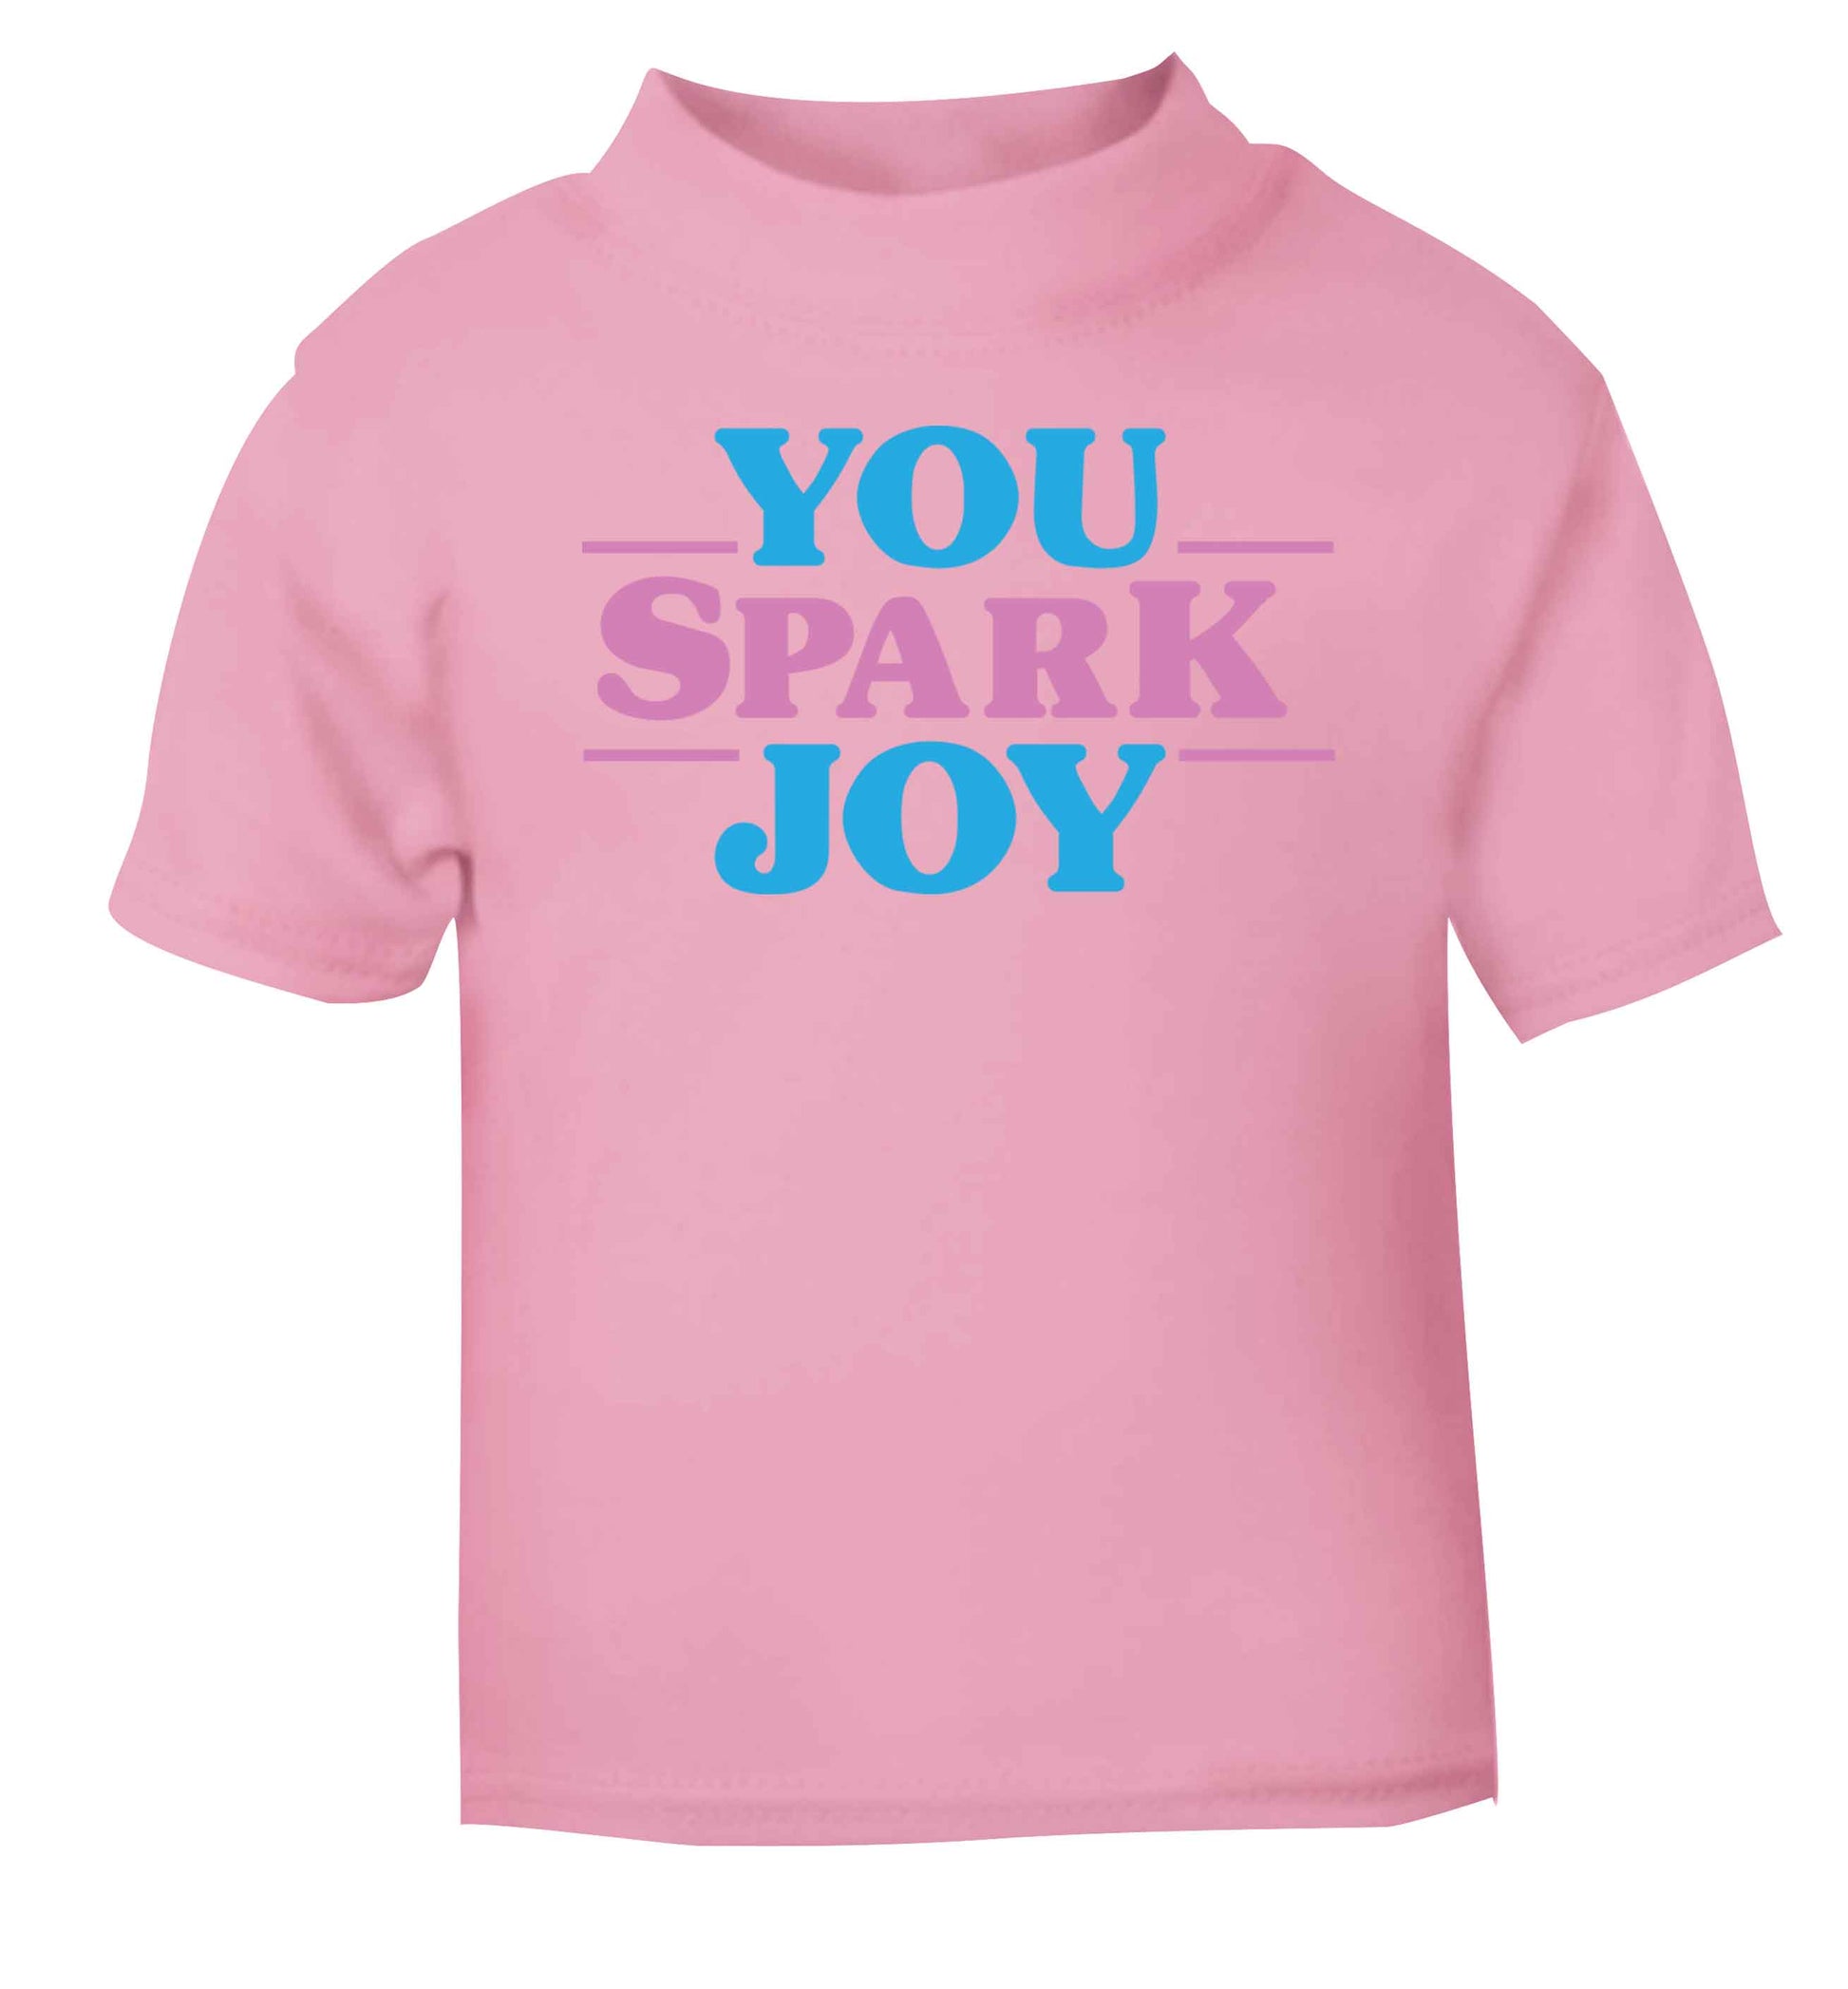 You spark joy light pink baby toddler Tshirt 2 Years